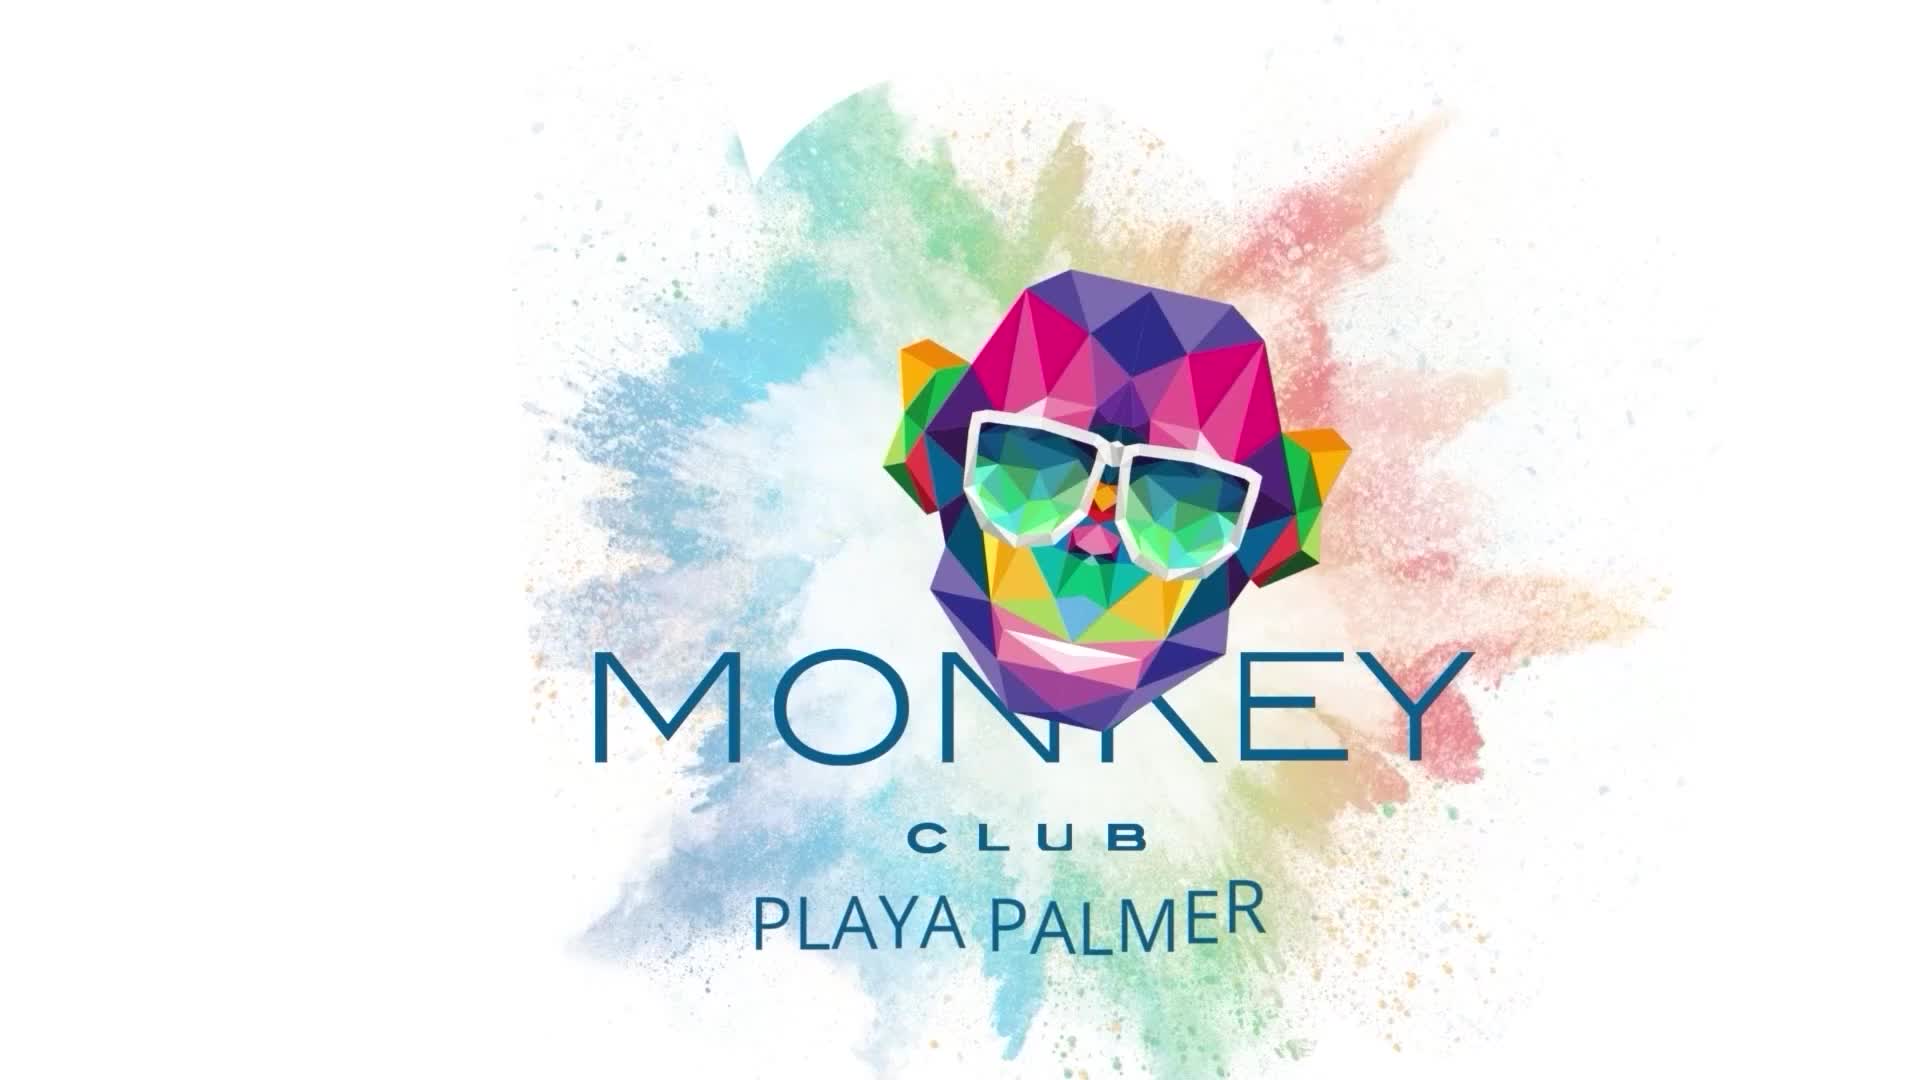 A promotional video showing the Monkey Club attractions at the Playa Palmera resort.